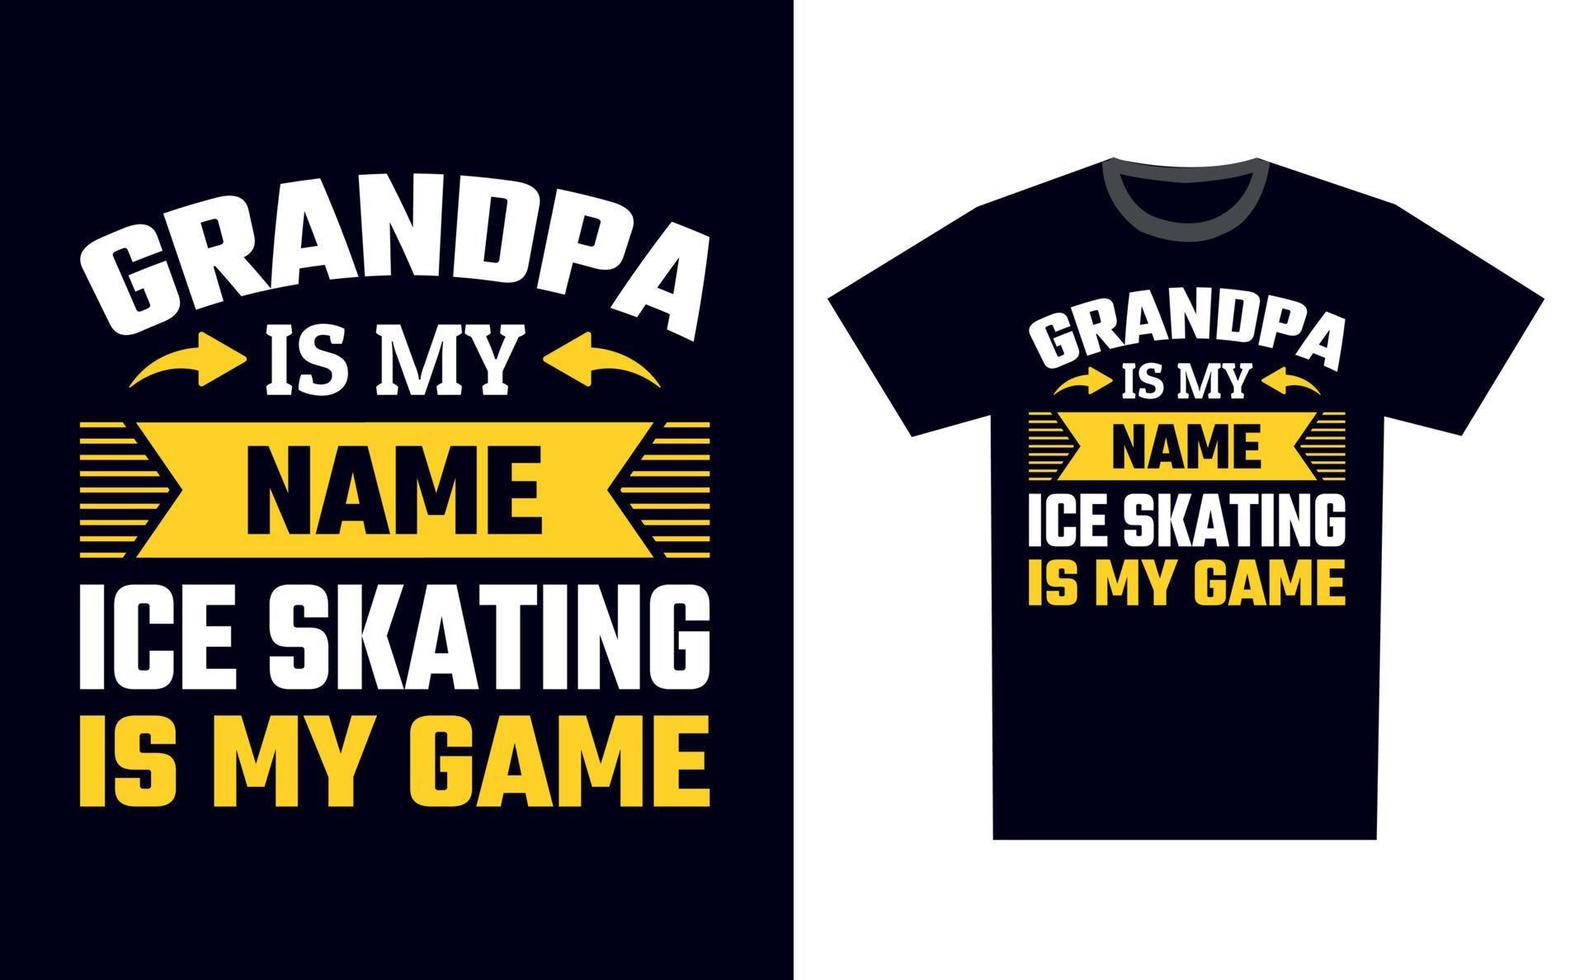 Ice Skating T Shirt Design Template Vector